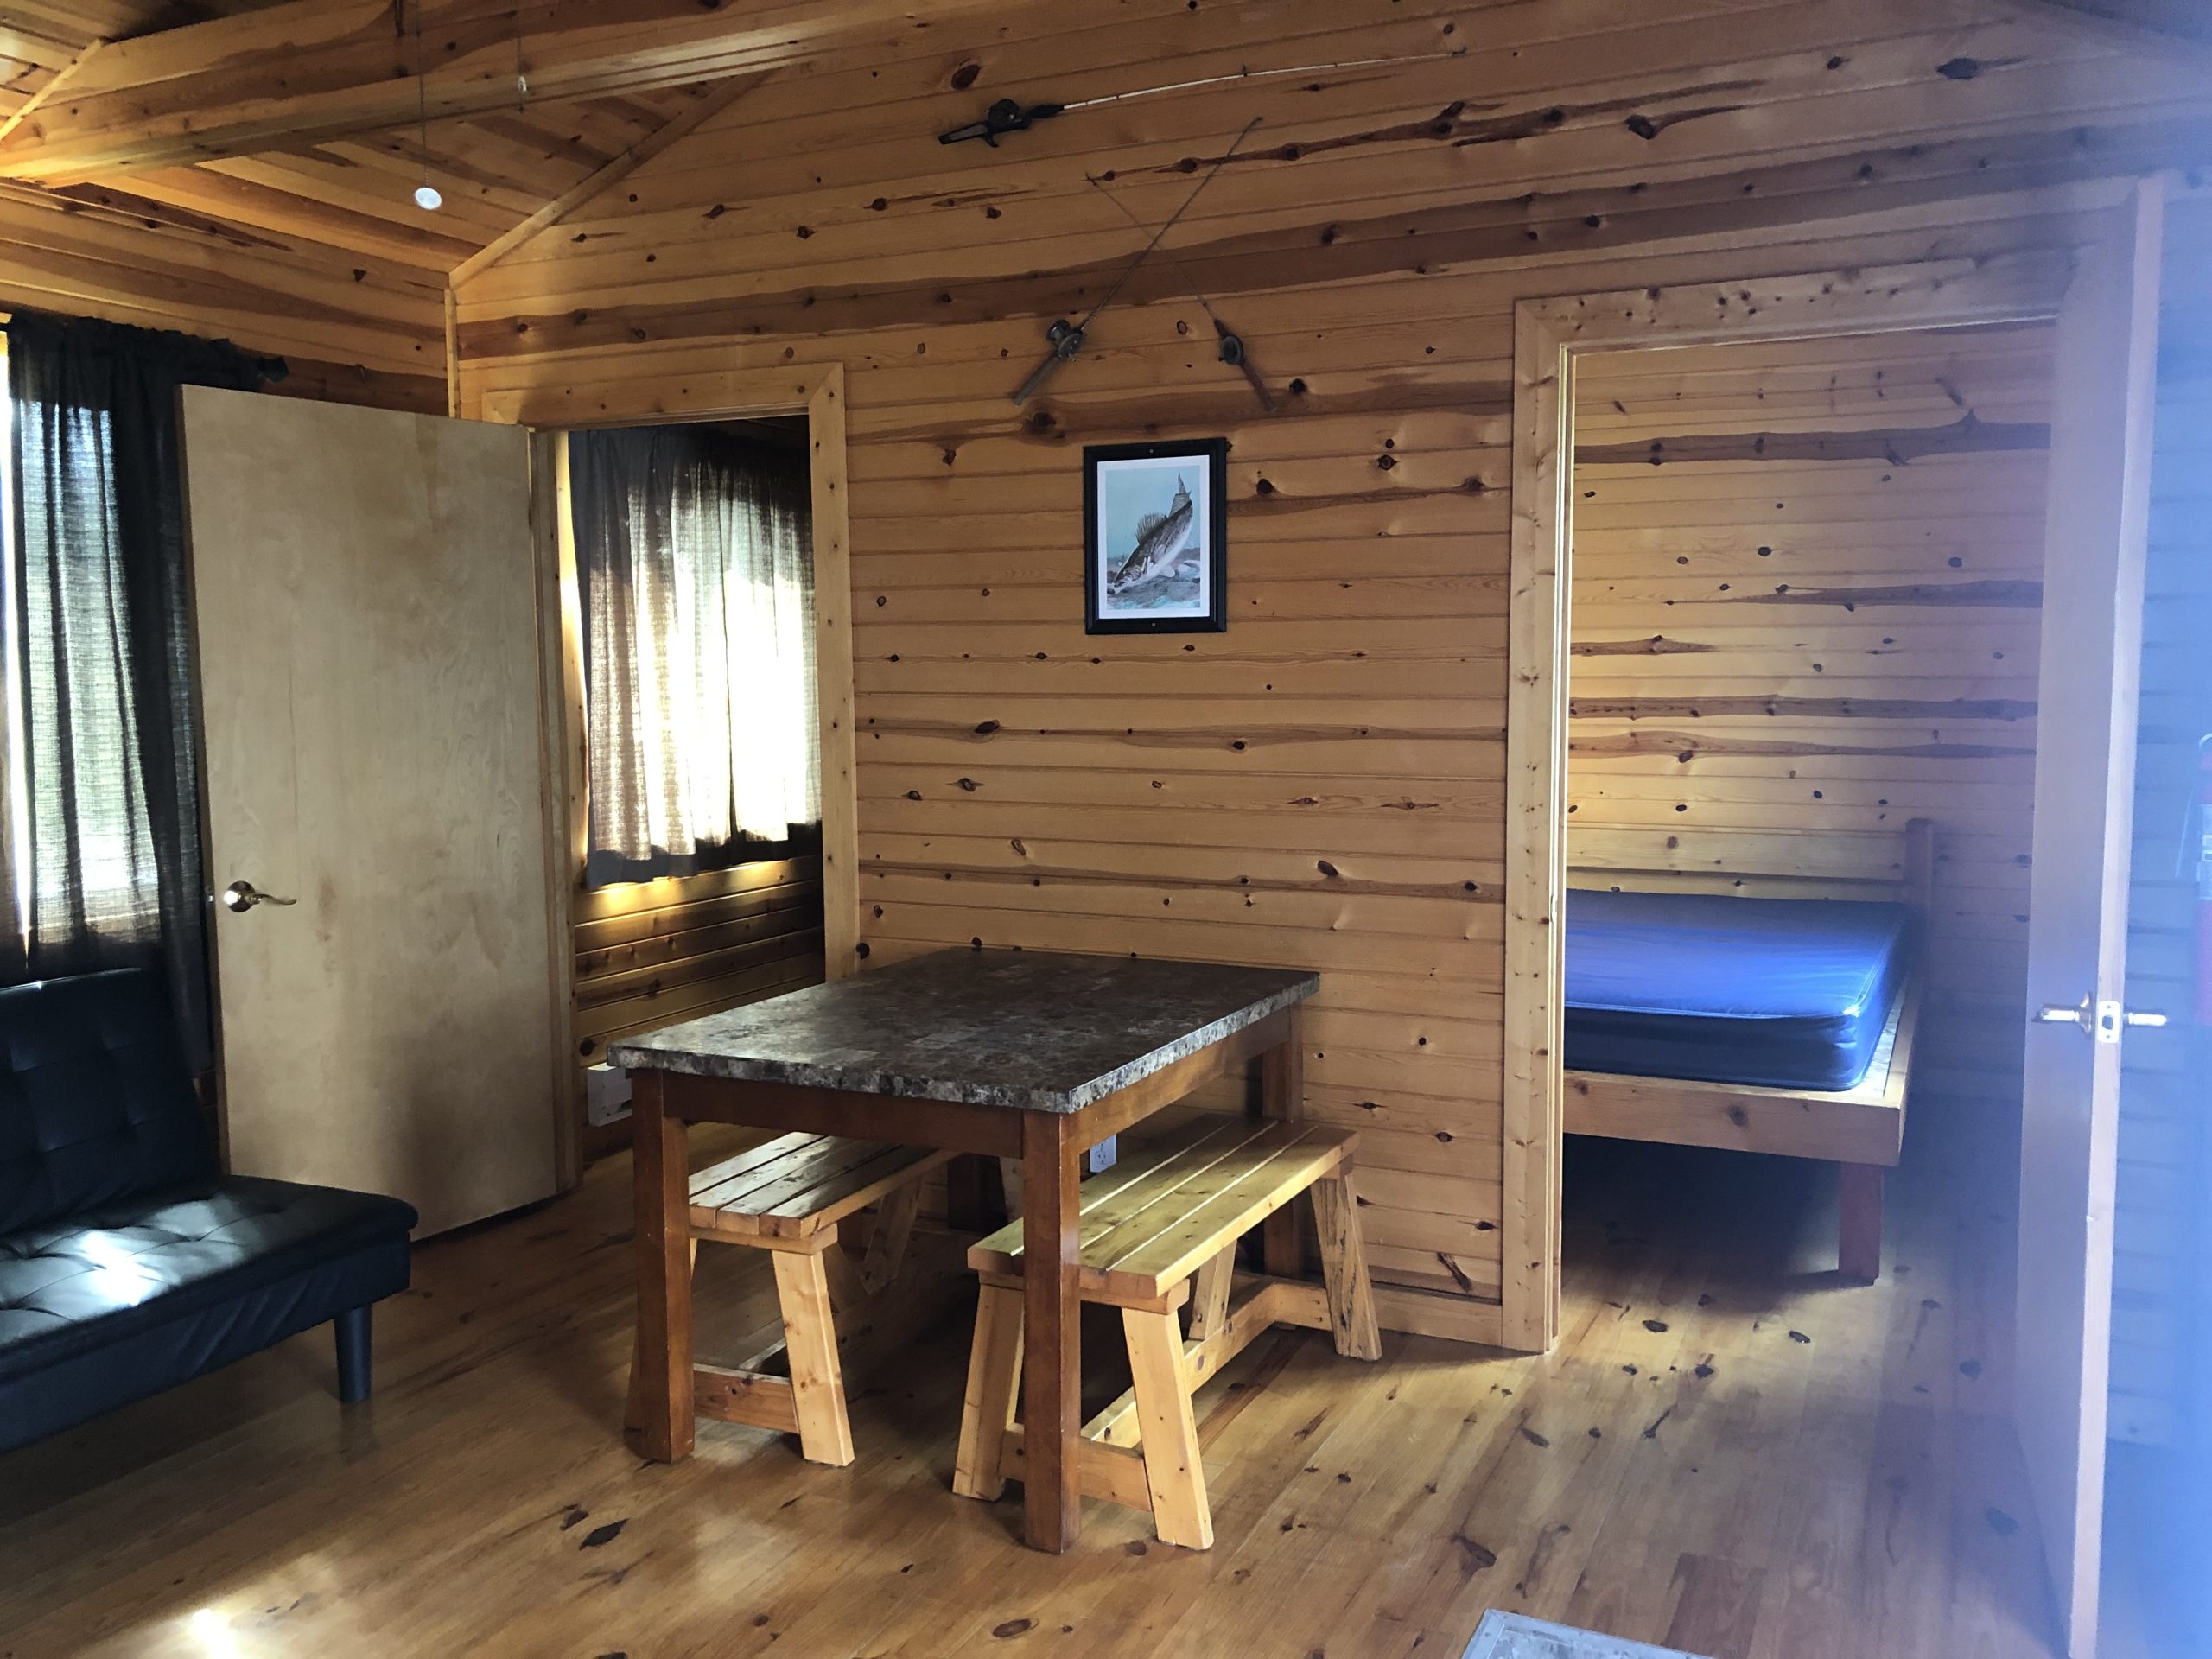 Ionia State Park Cabins - Walleye Dining Area and Entrances to the Bedrooms